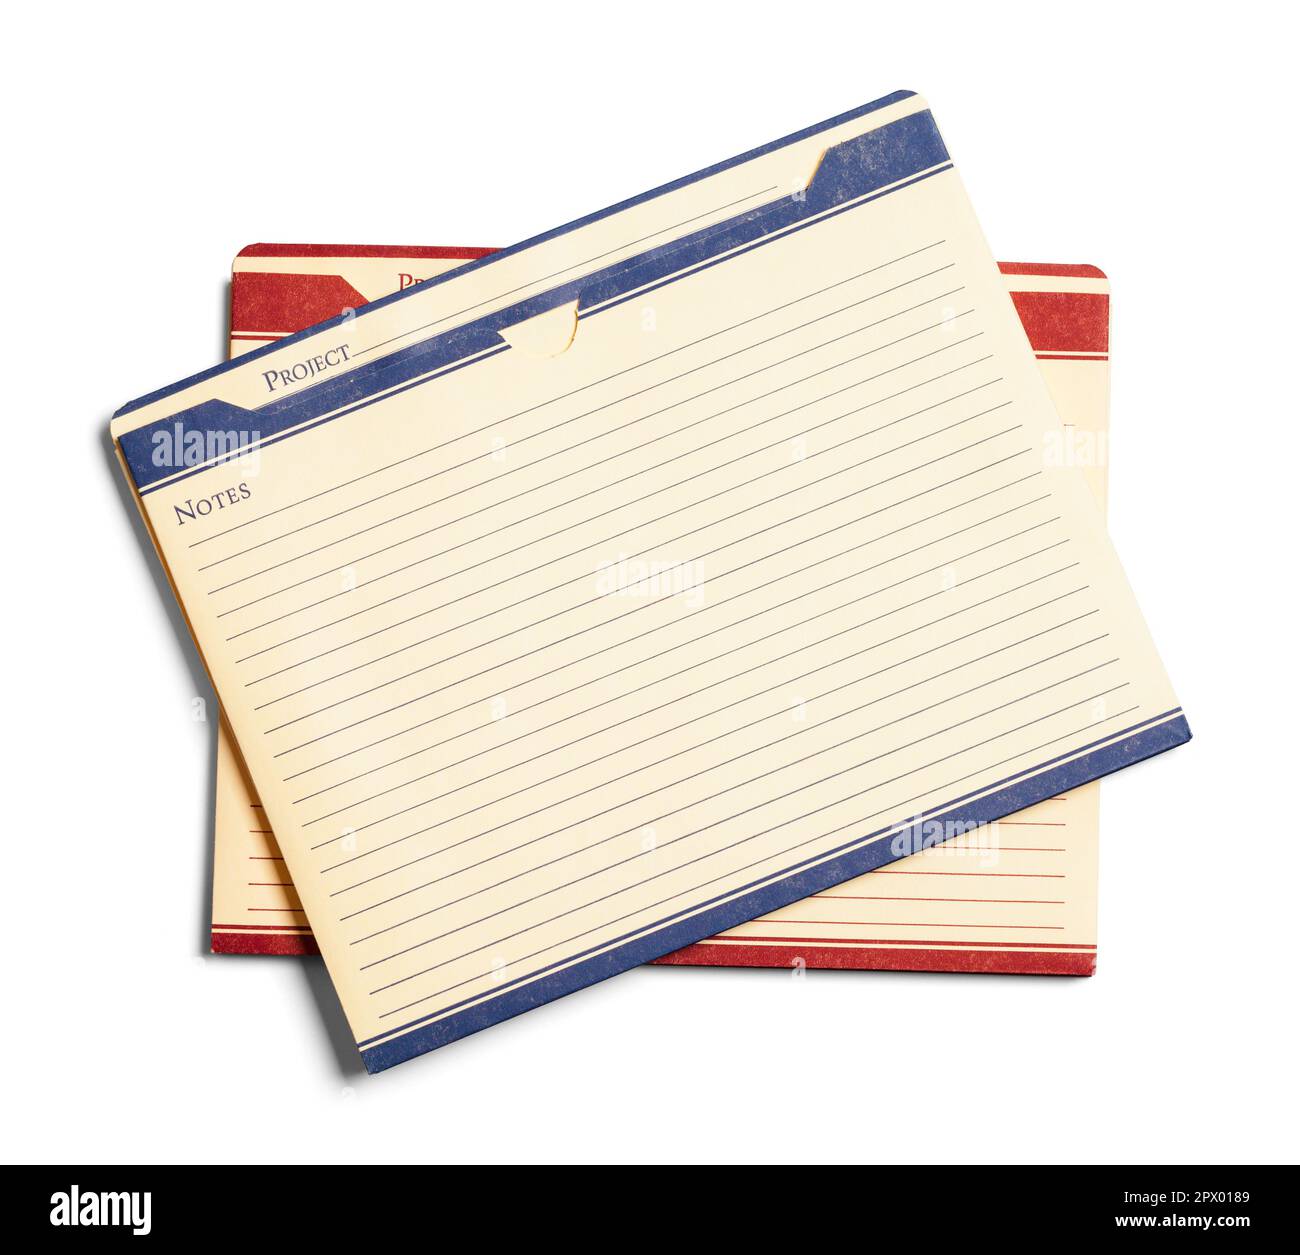 Two Project File Folders Cut Out on White. Stock Photo